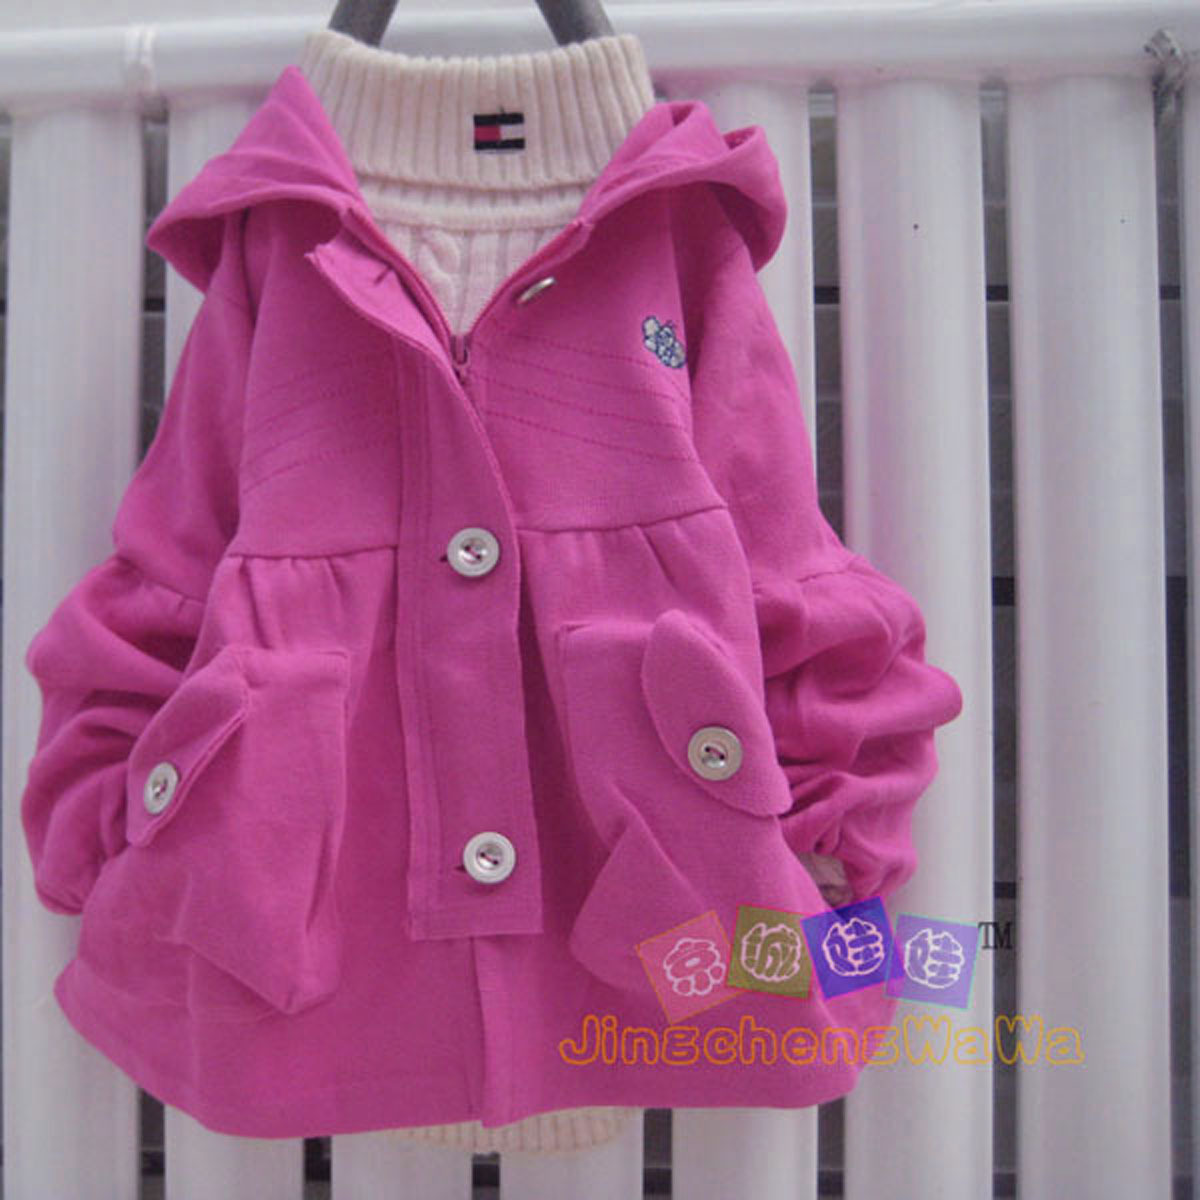 Jc1289 spring and autumn female child solid color outerwear girl all-match cardigan top